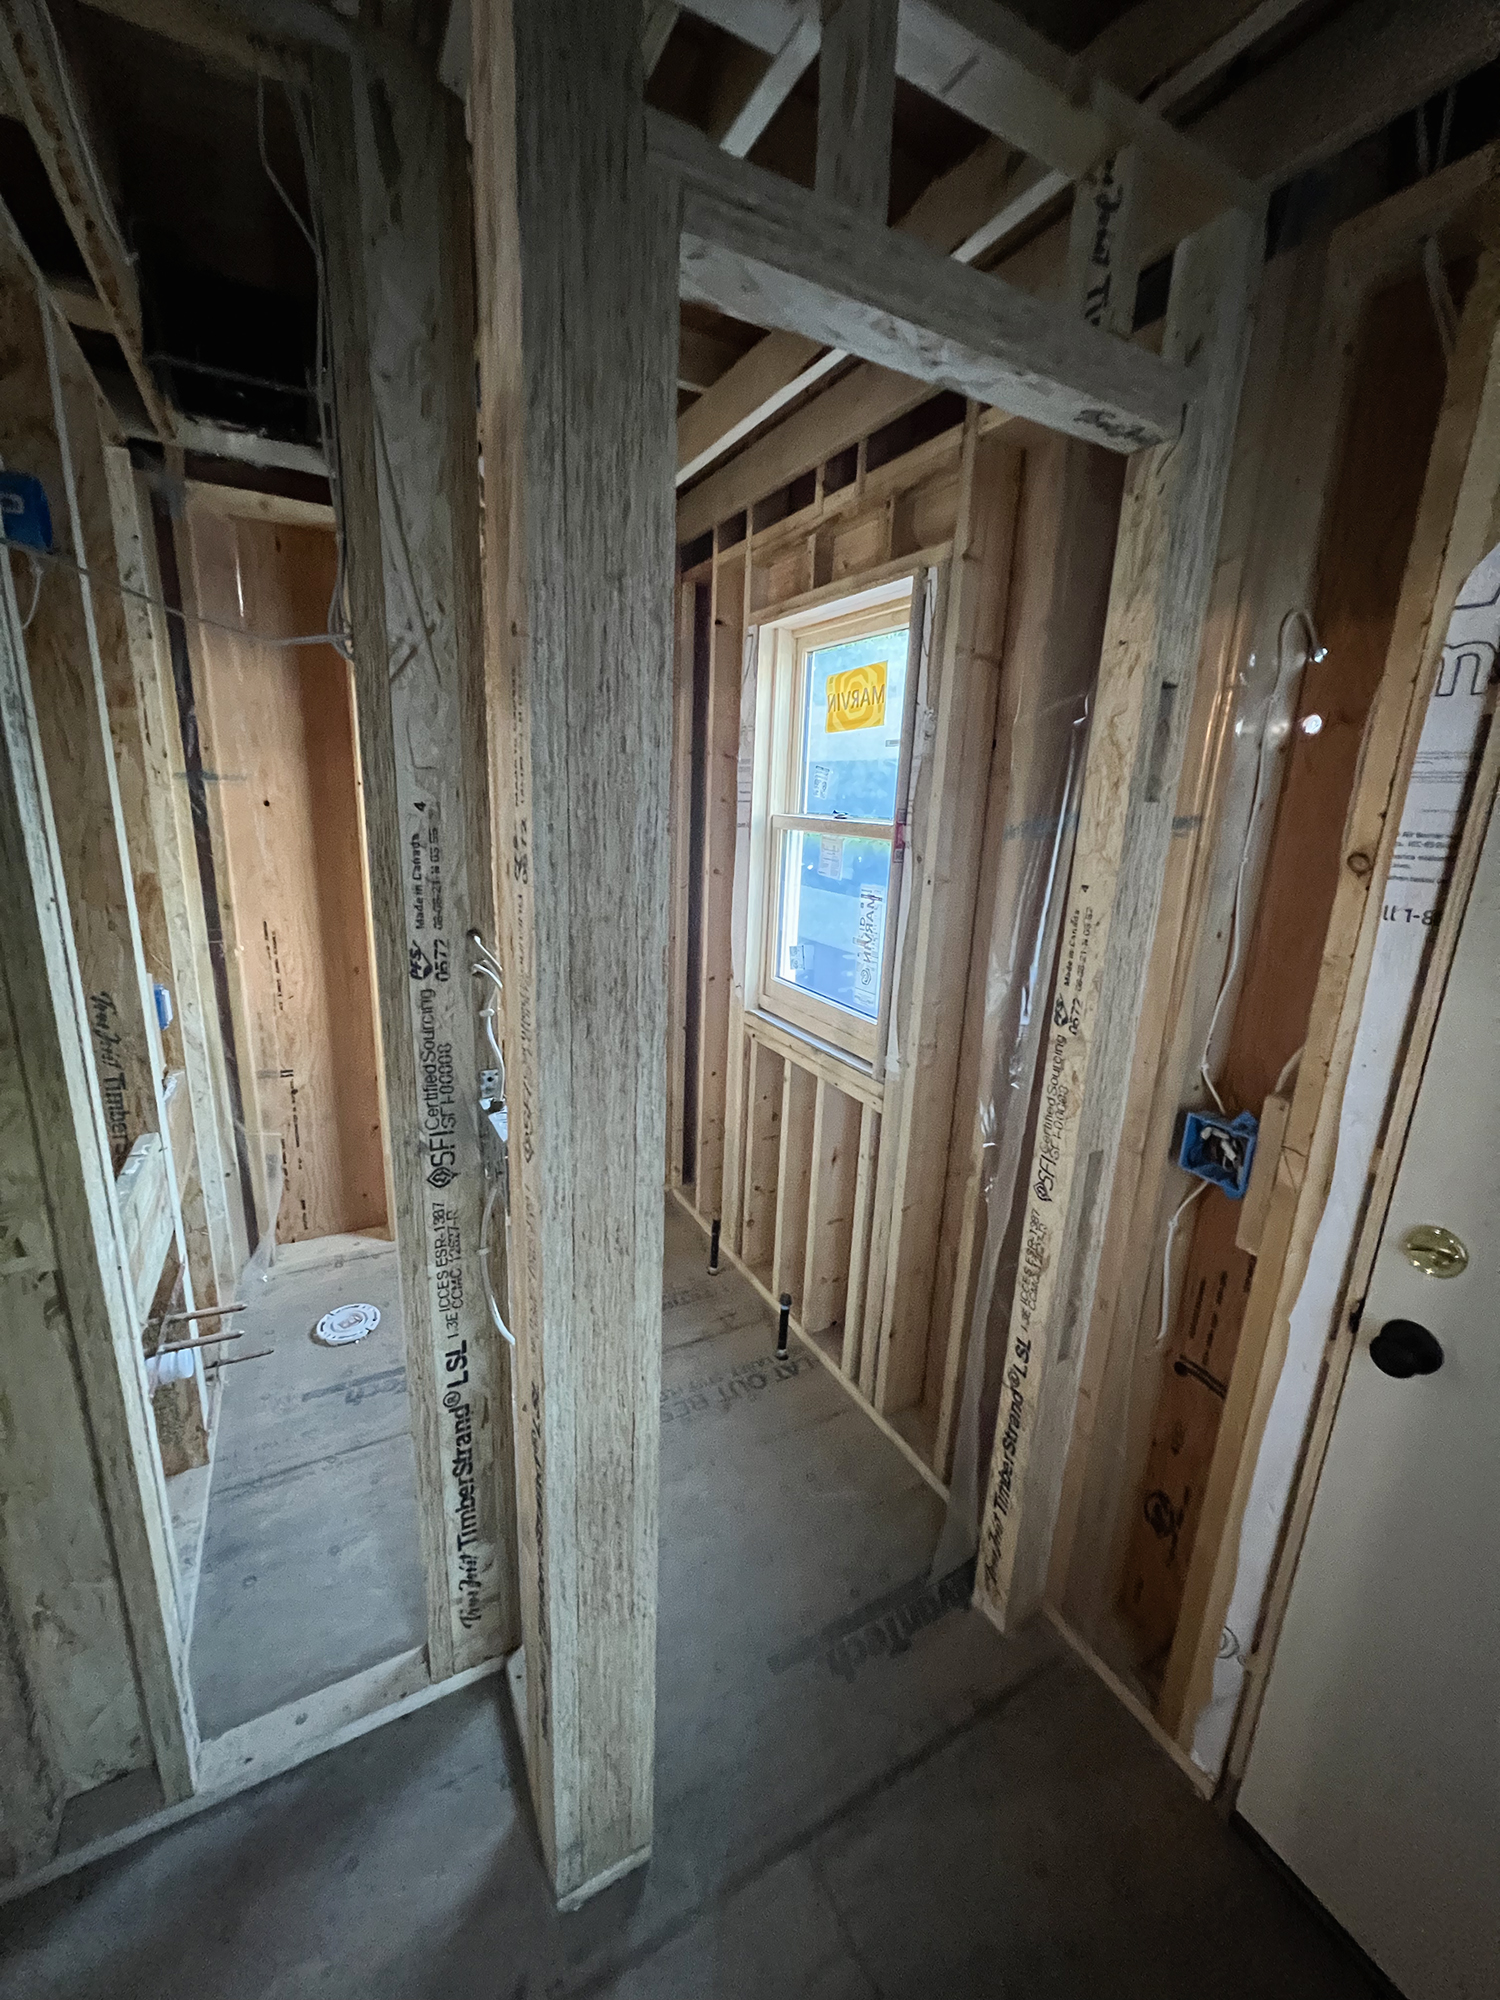 Windows are in - view into the bathroom